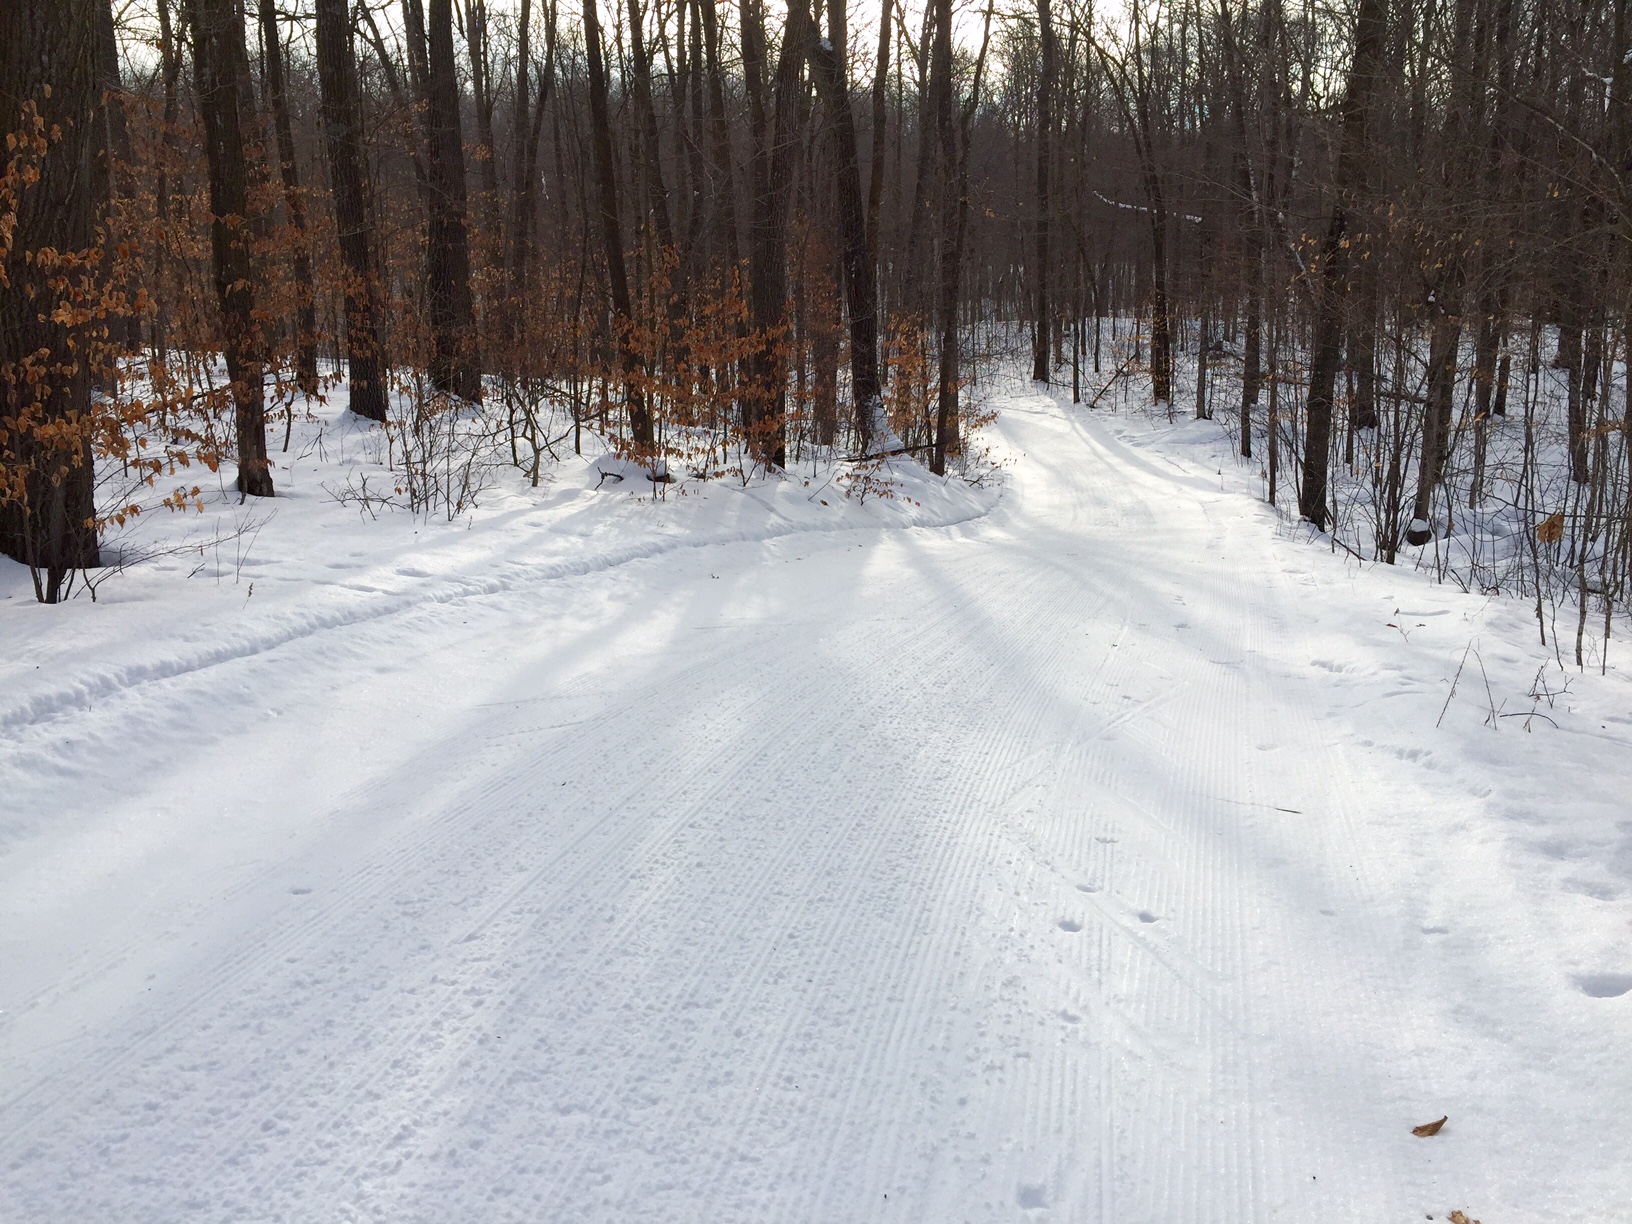 Skaters Waltz after fresh grooming. January 29th, 2016. Firm deck, enough loose on top for good edging, fast and fun!